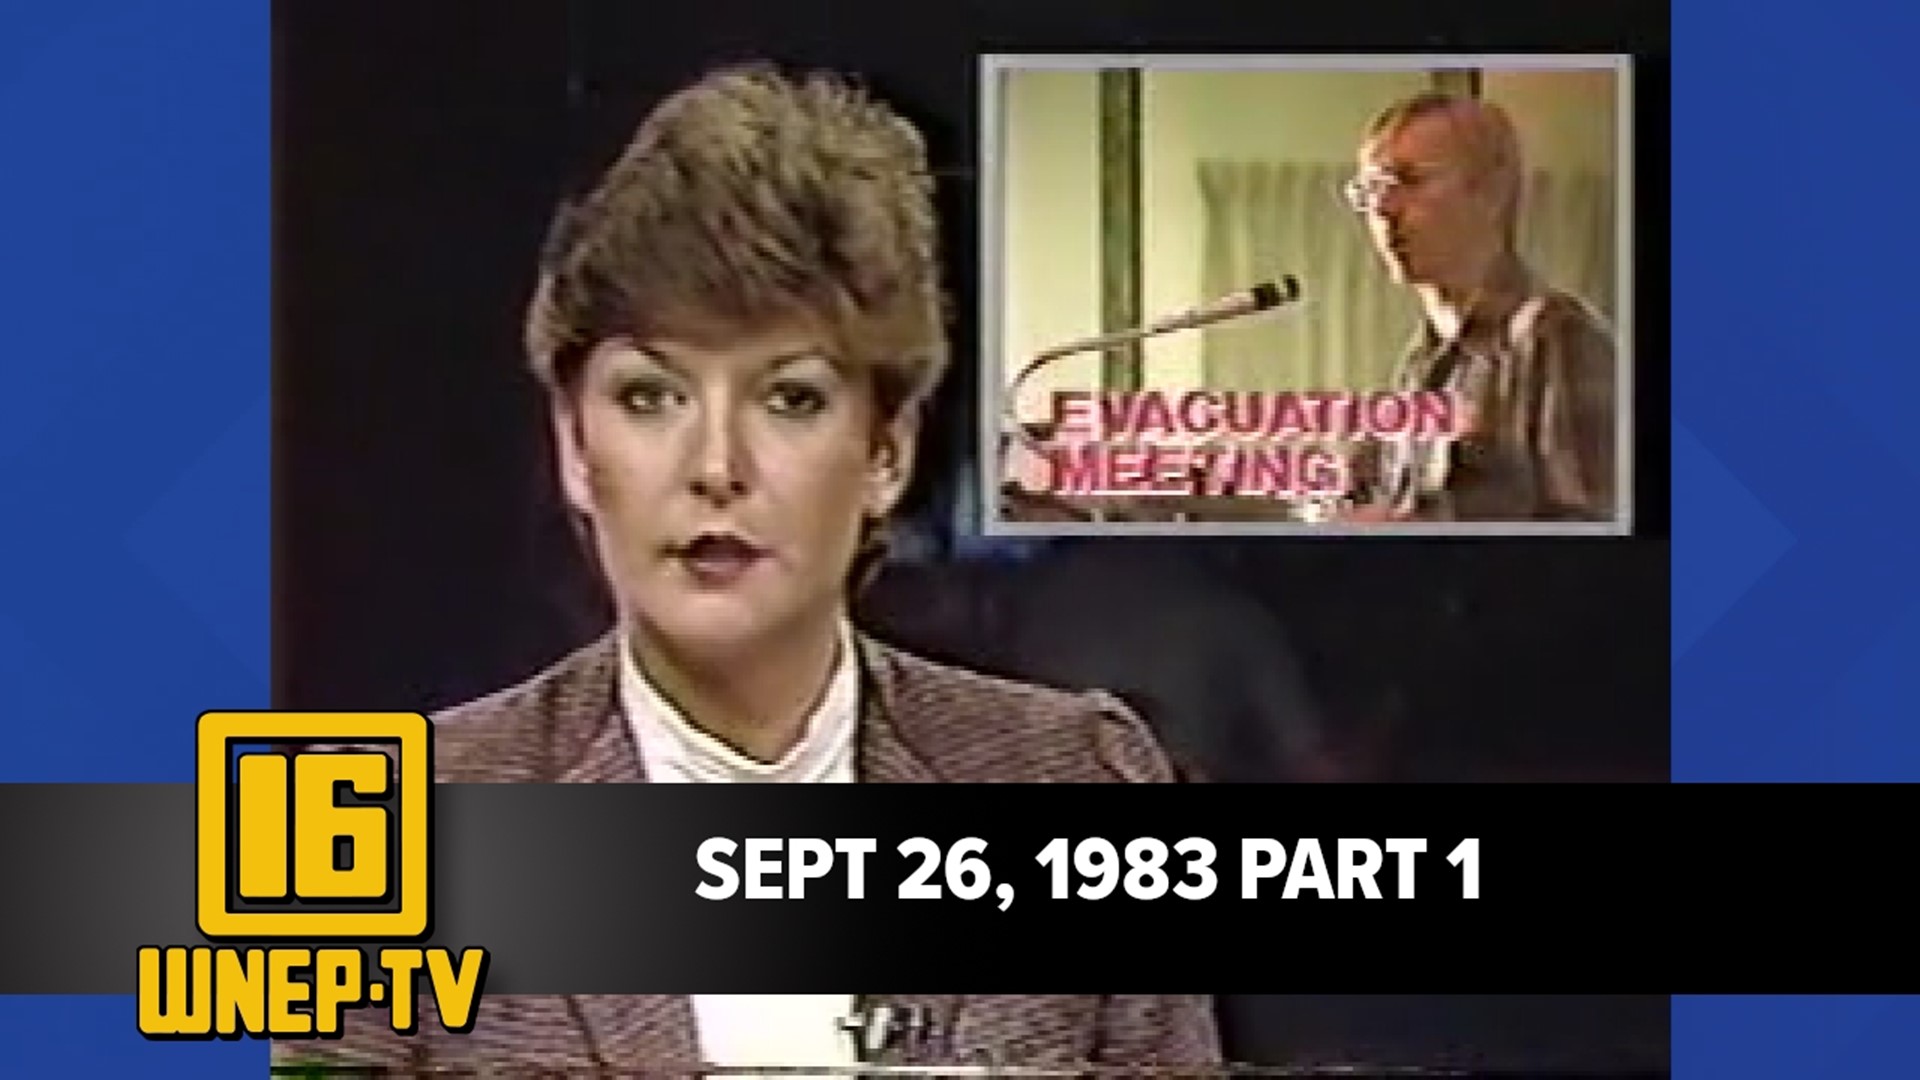 Join Karen Harch with curated stories from September 26, 1983.